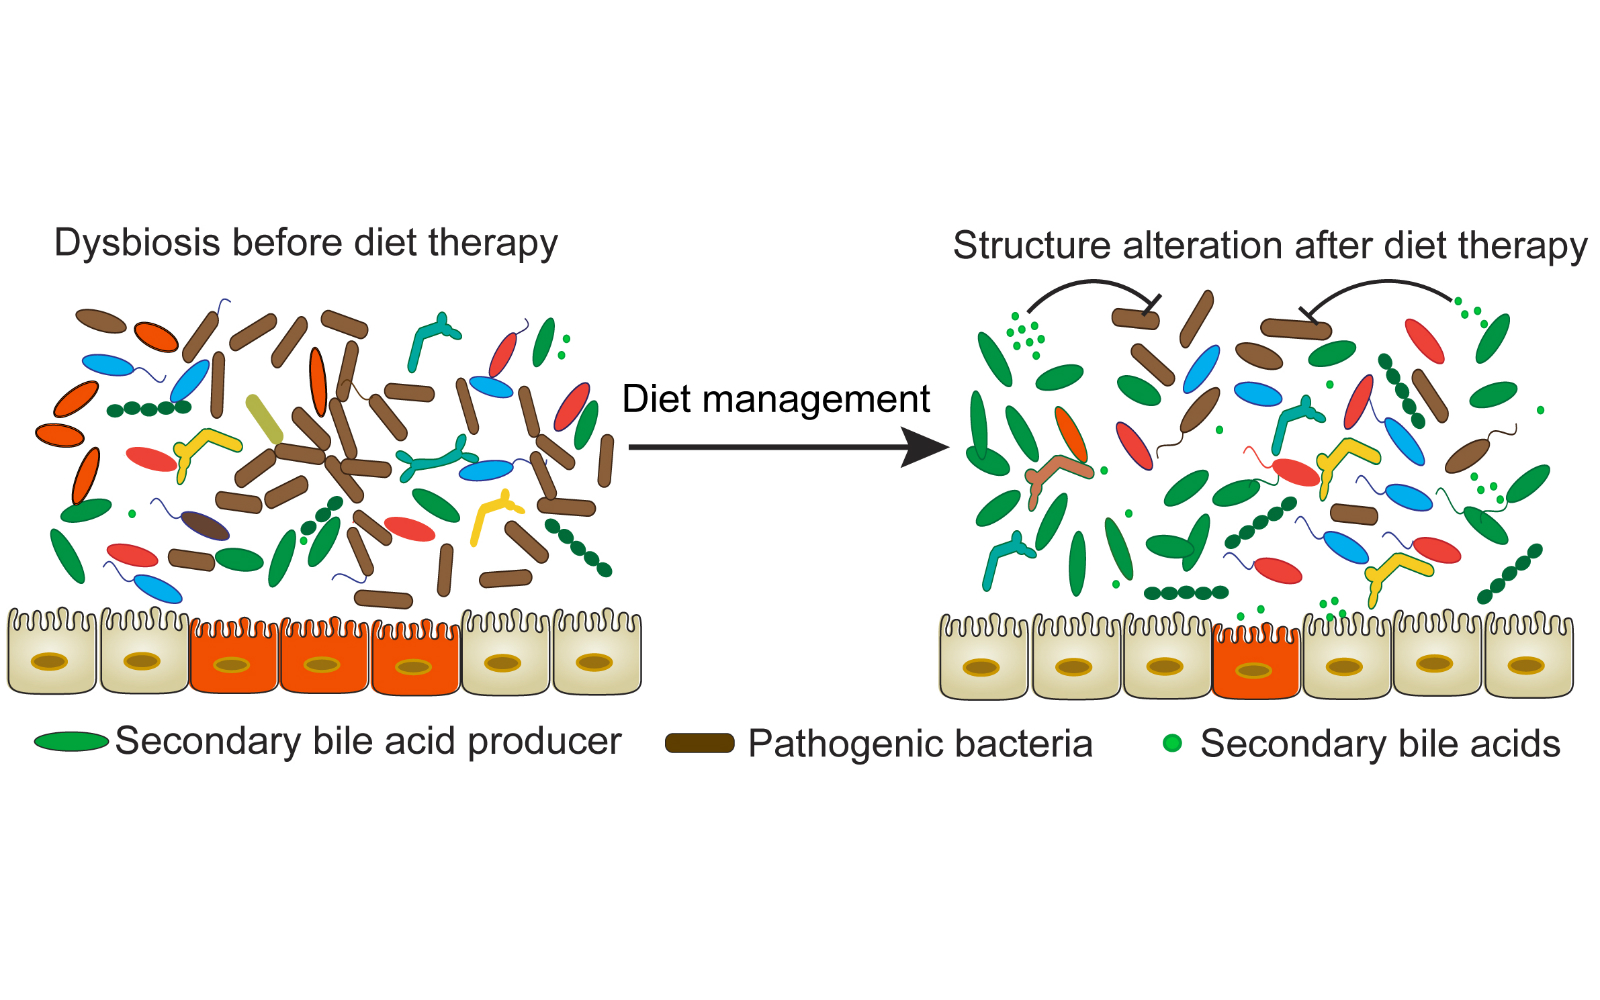 scientific diagram shows transition of the microbiome with diet. dysbiosis before diet therapy is transformed by diet management with a structure alteration after diet therapy. After image shows more secondary bile acid producers, fewer pathogenic bacteria, and more secondary bile acids